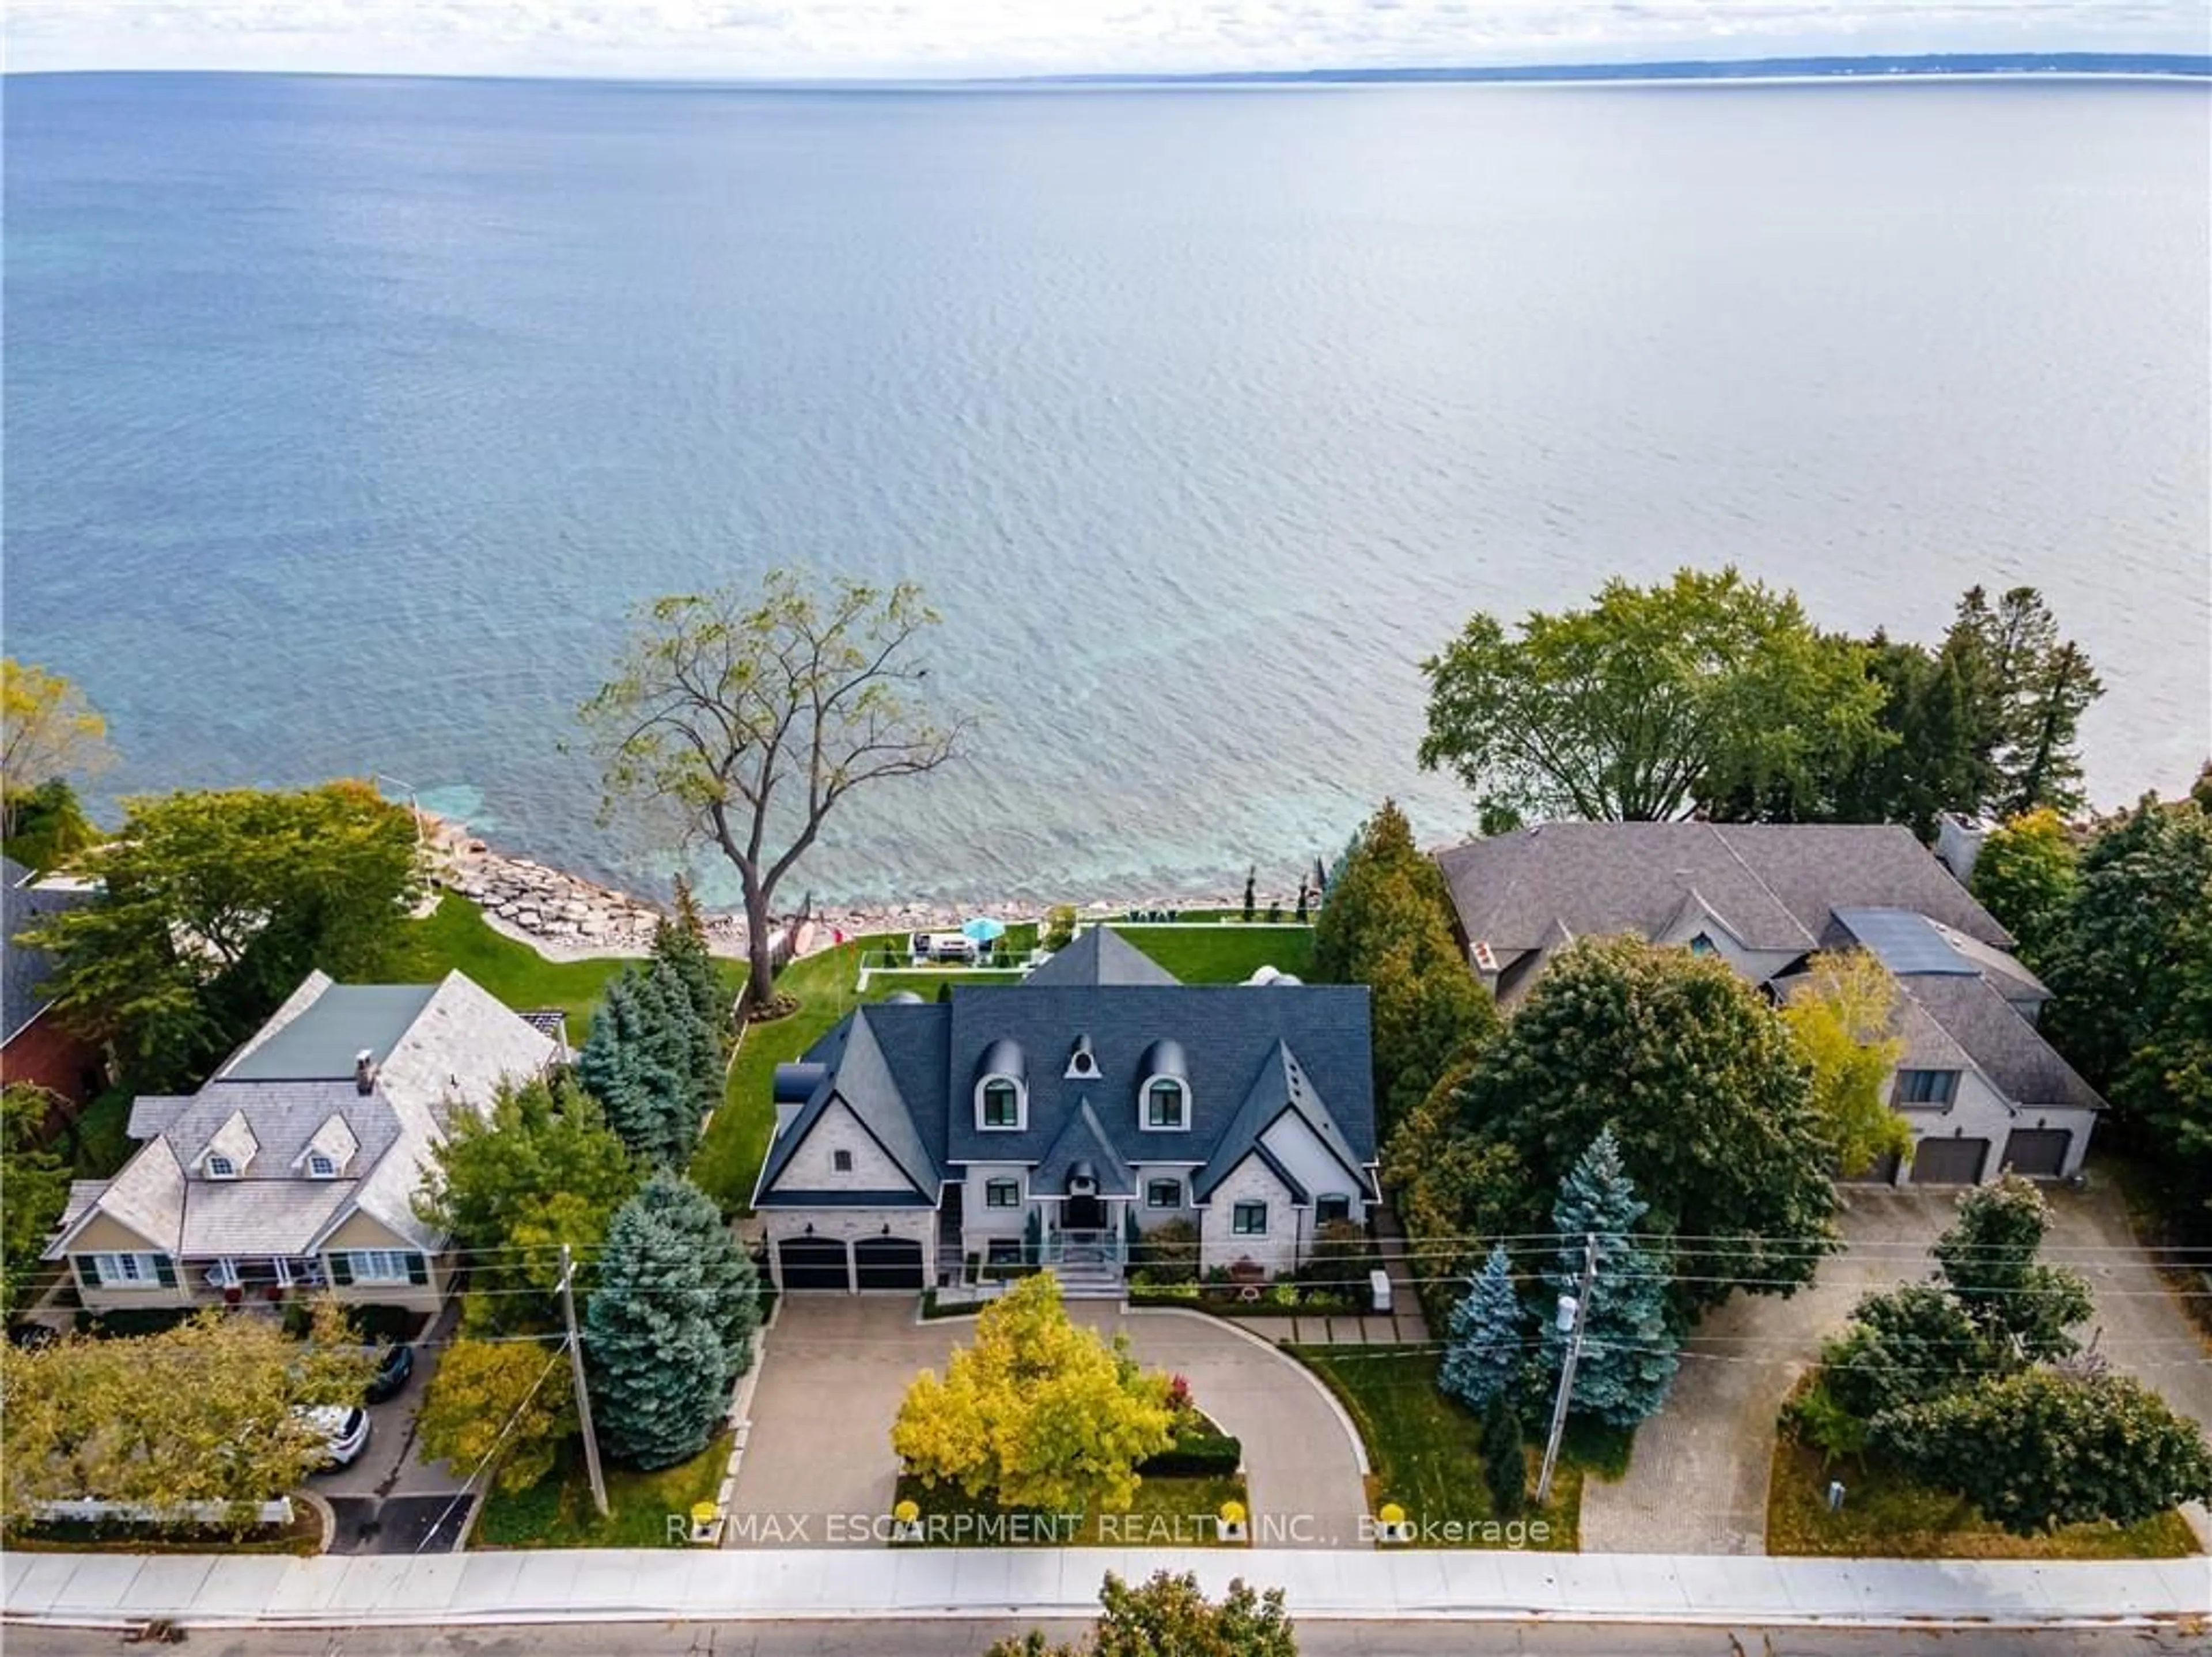 Lakeview for 3188 Lakeshore Rd, Burlington Ontario L7N 1A4